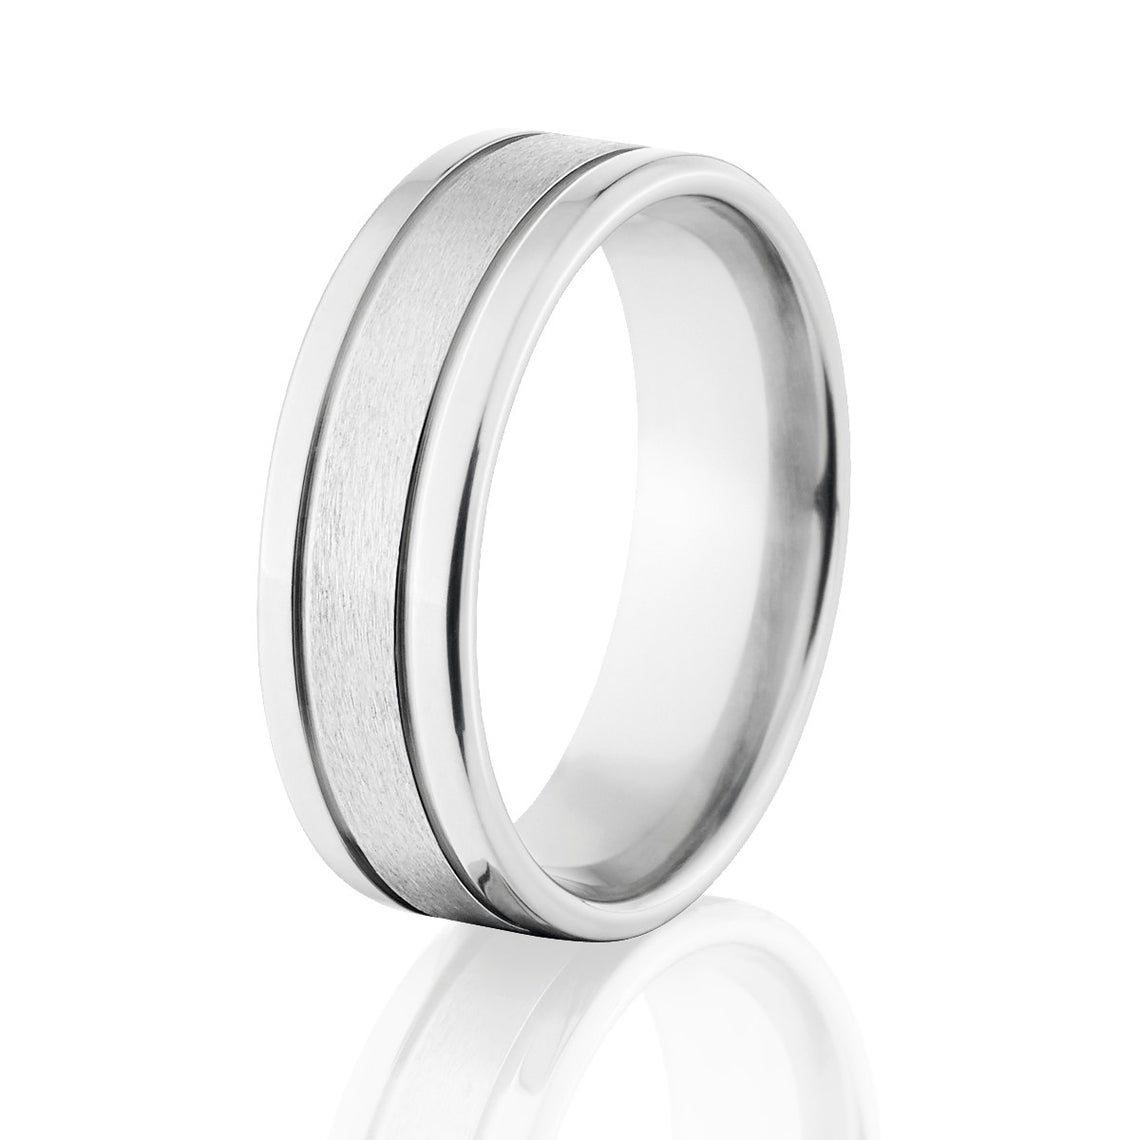 6mm wide cobalt wedding band with dual edge grooves